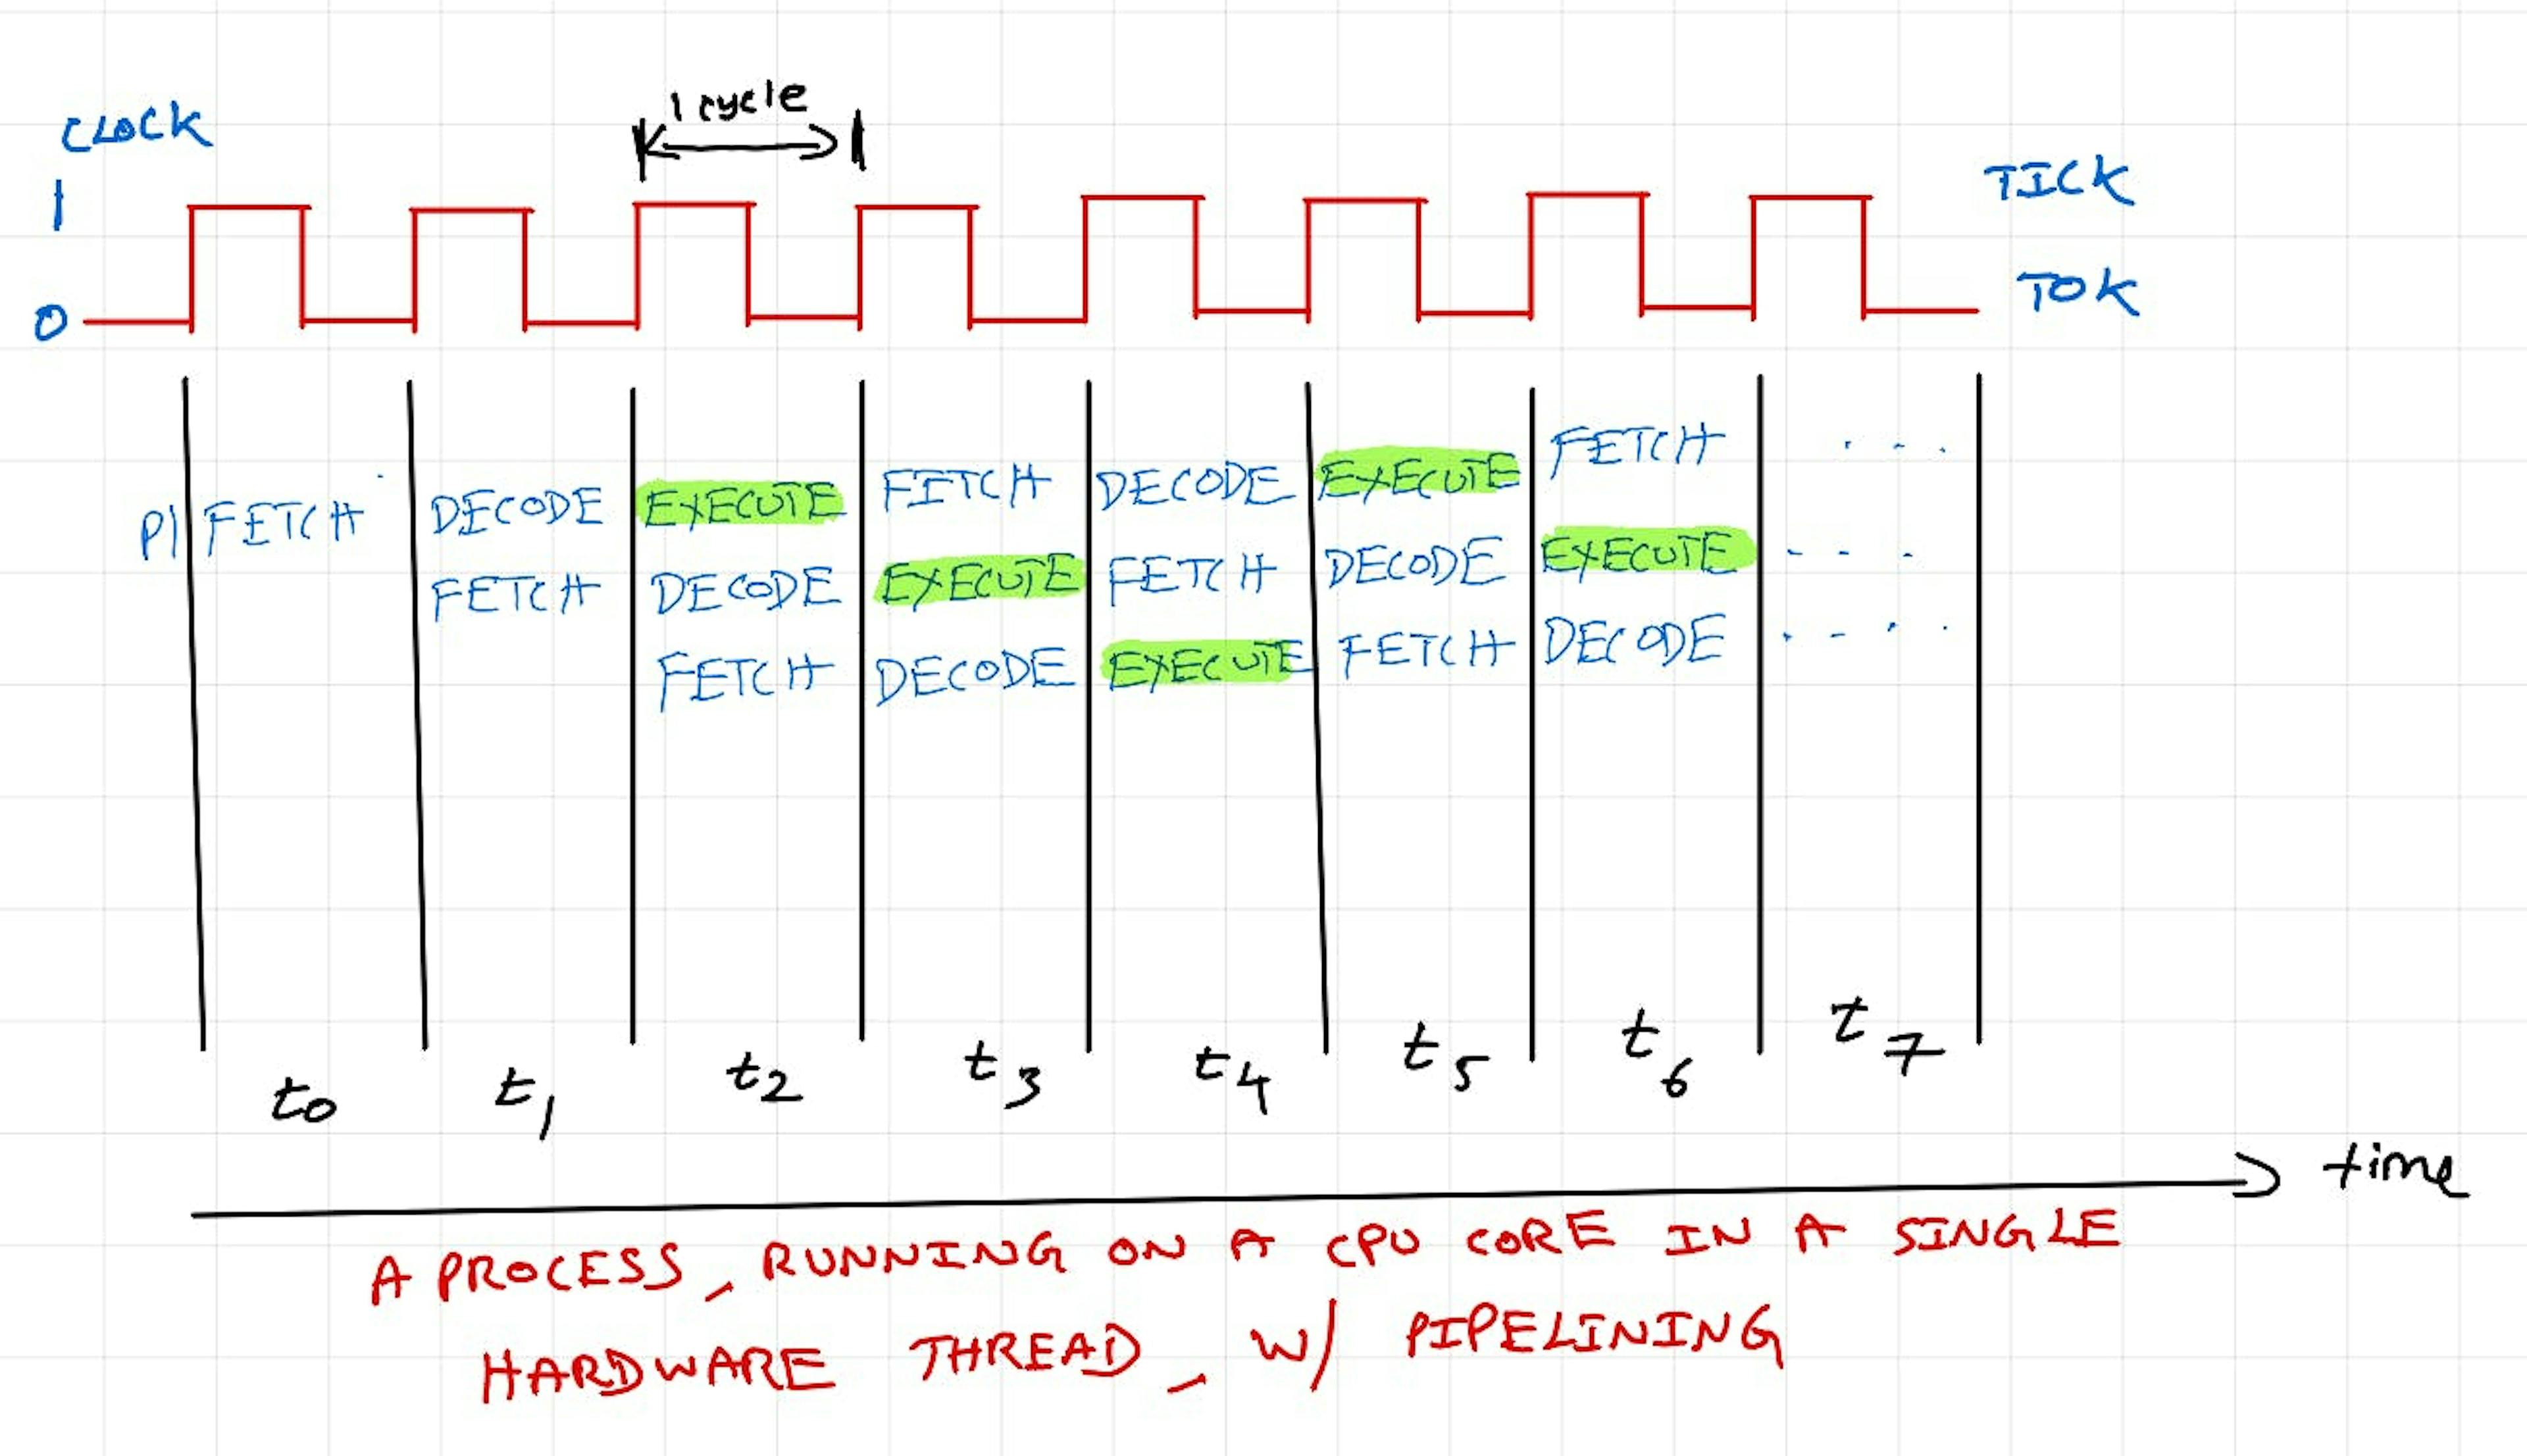 A process, running on a CPU core in a single hardware thread, w/ pipelining